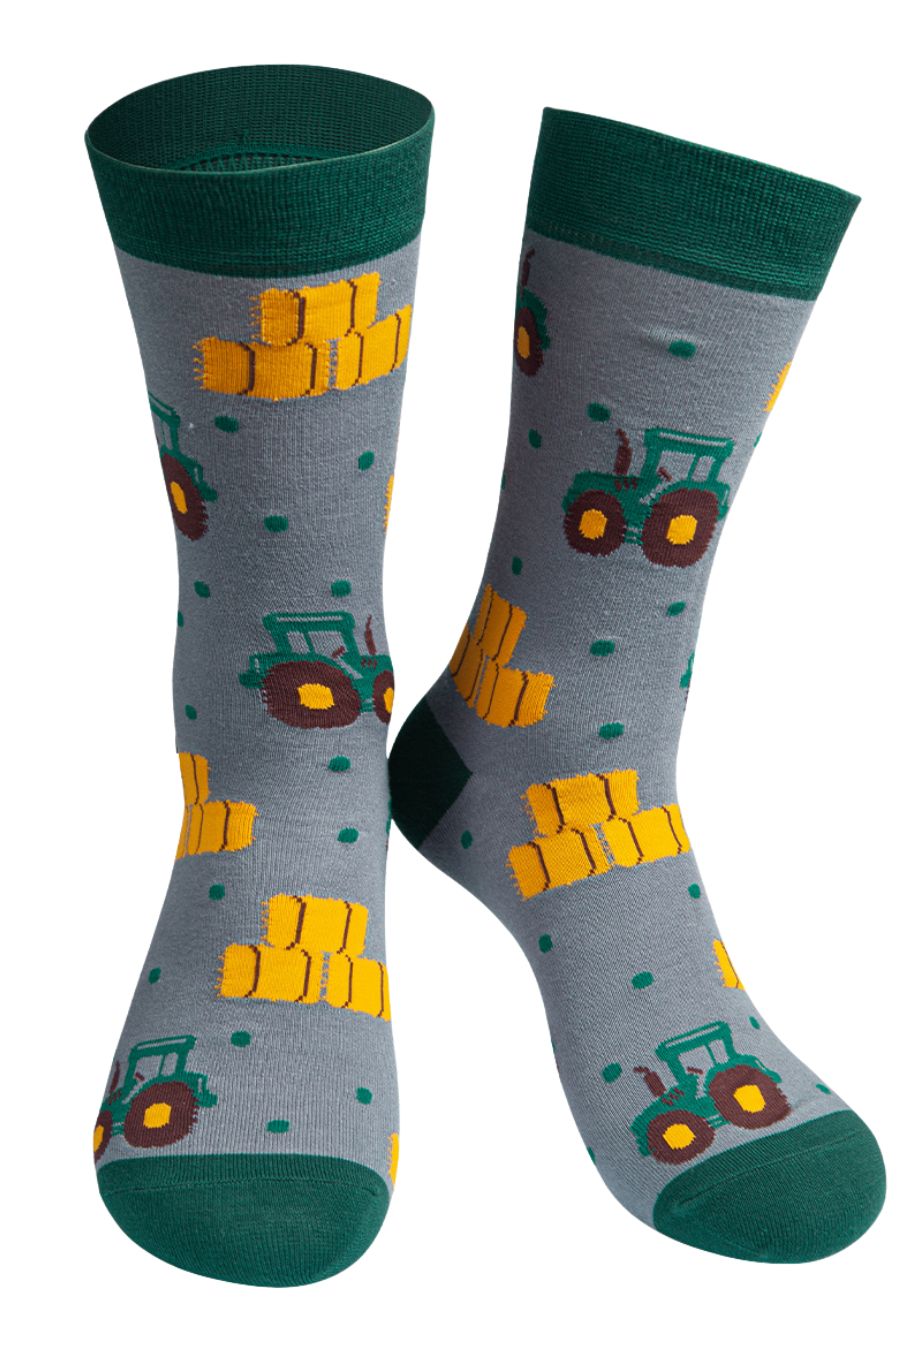 grey, green dress socks with green tractors and yellow hay bales